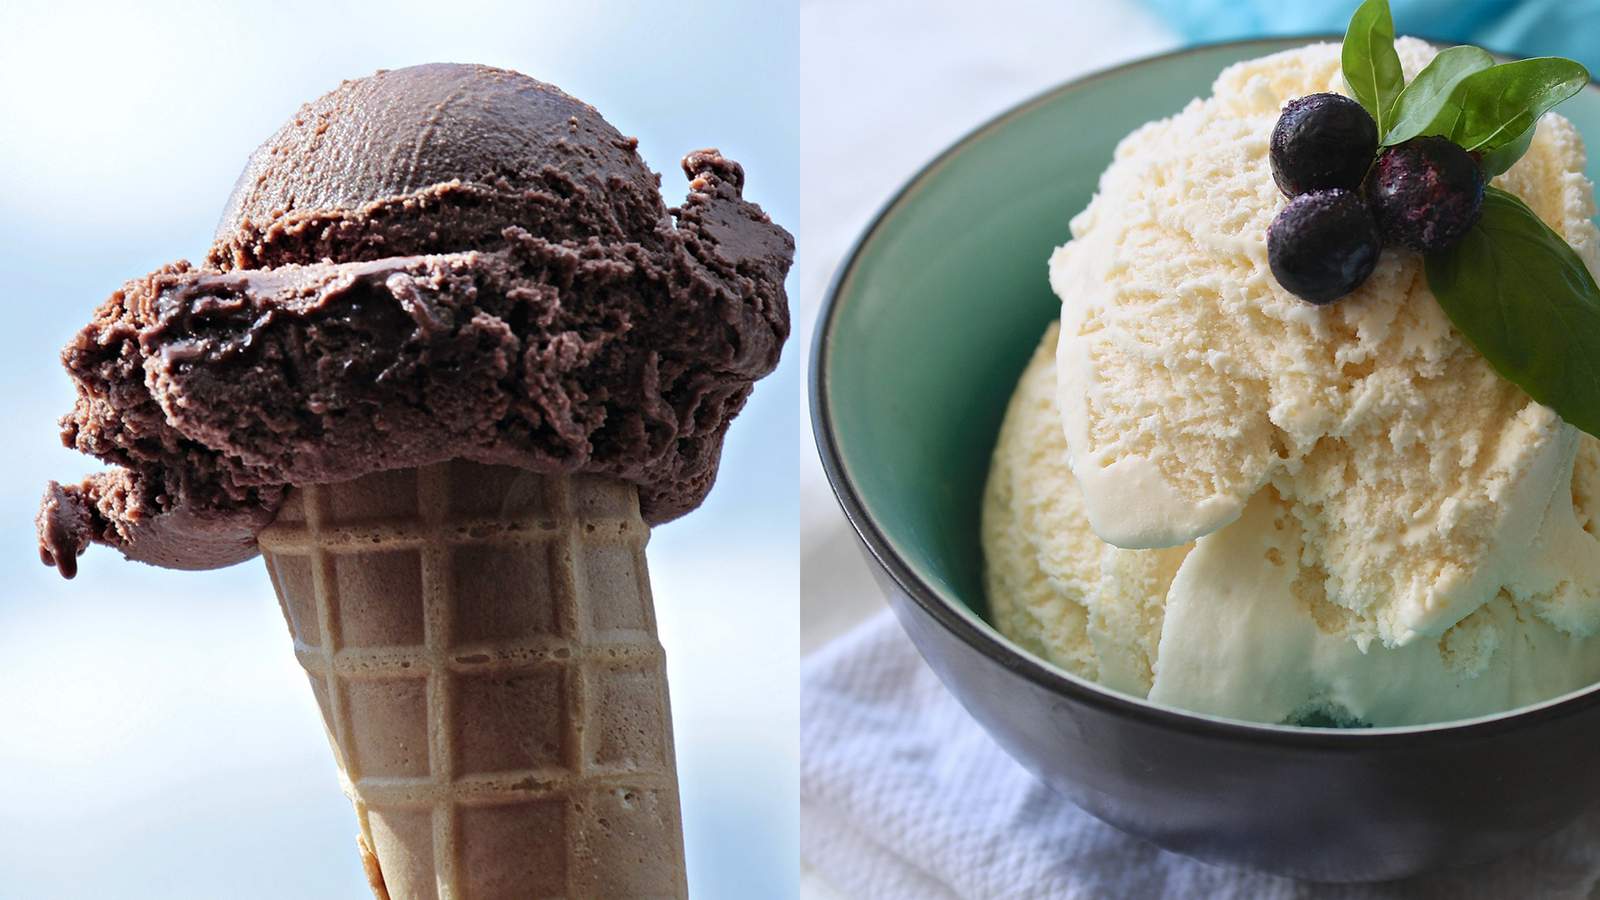 Celebrate National Ice Cream Day Sunday with giveaway offer